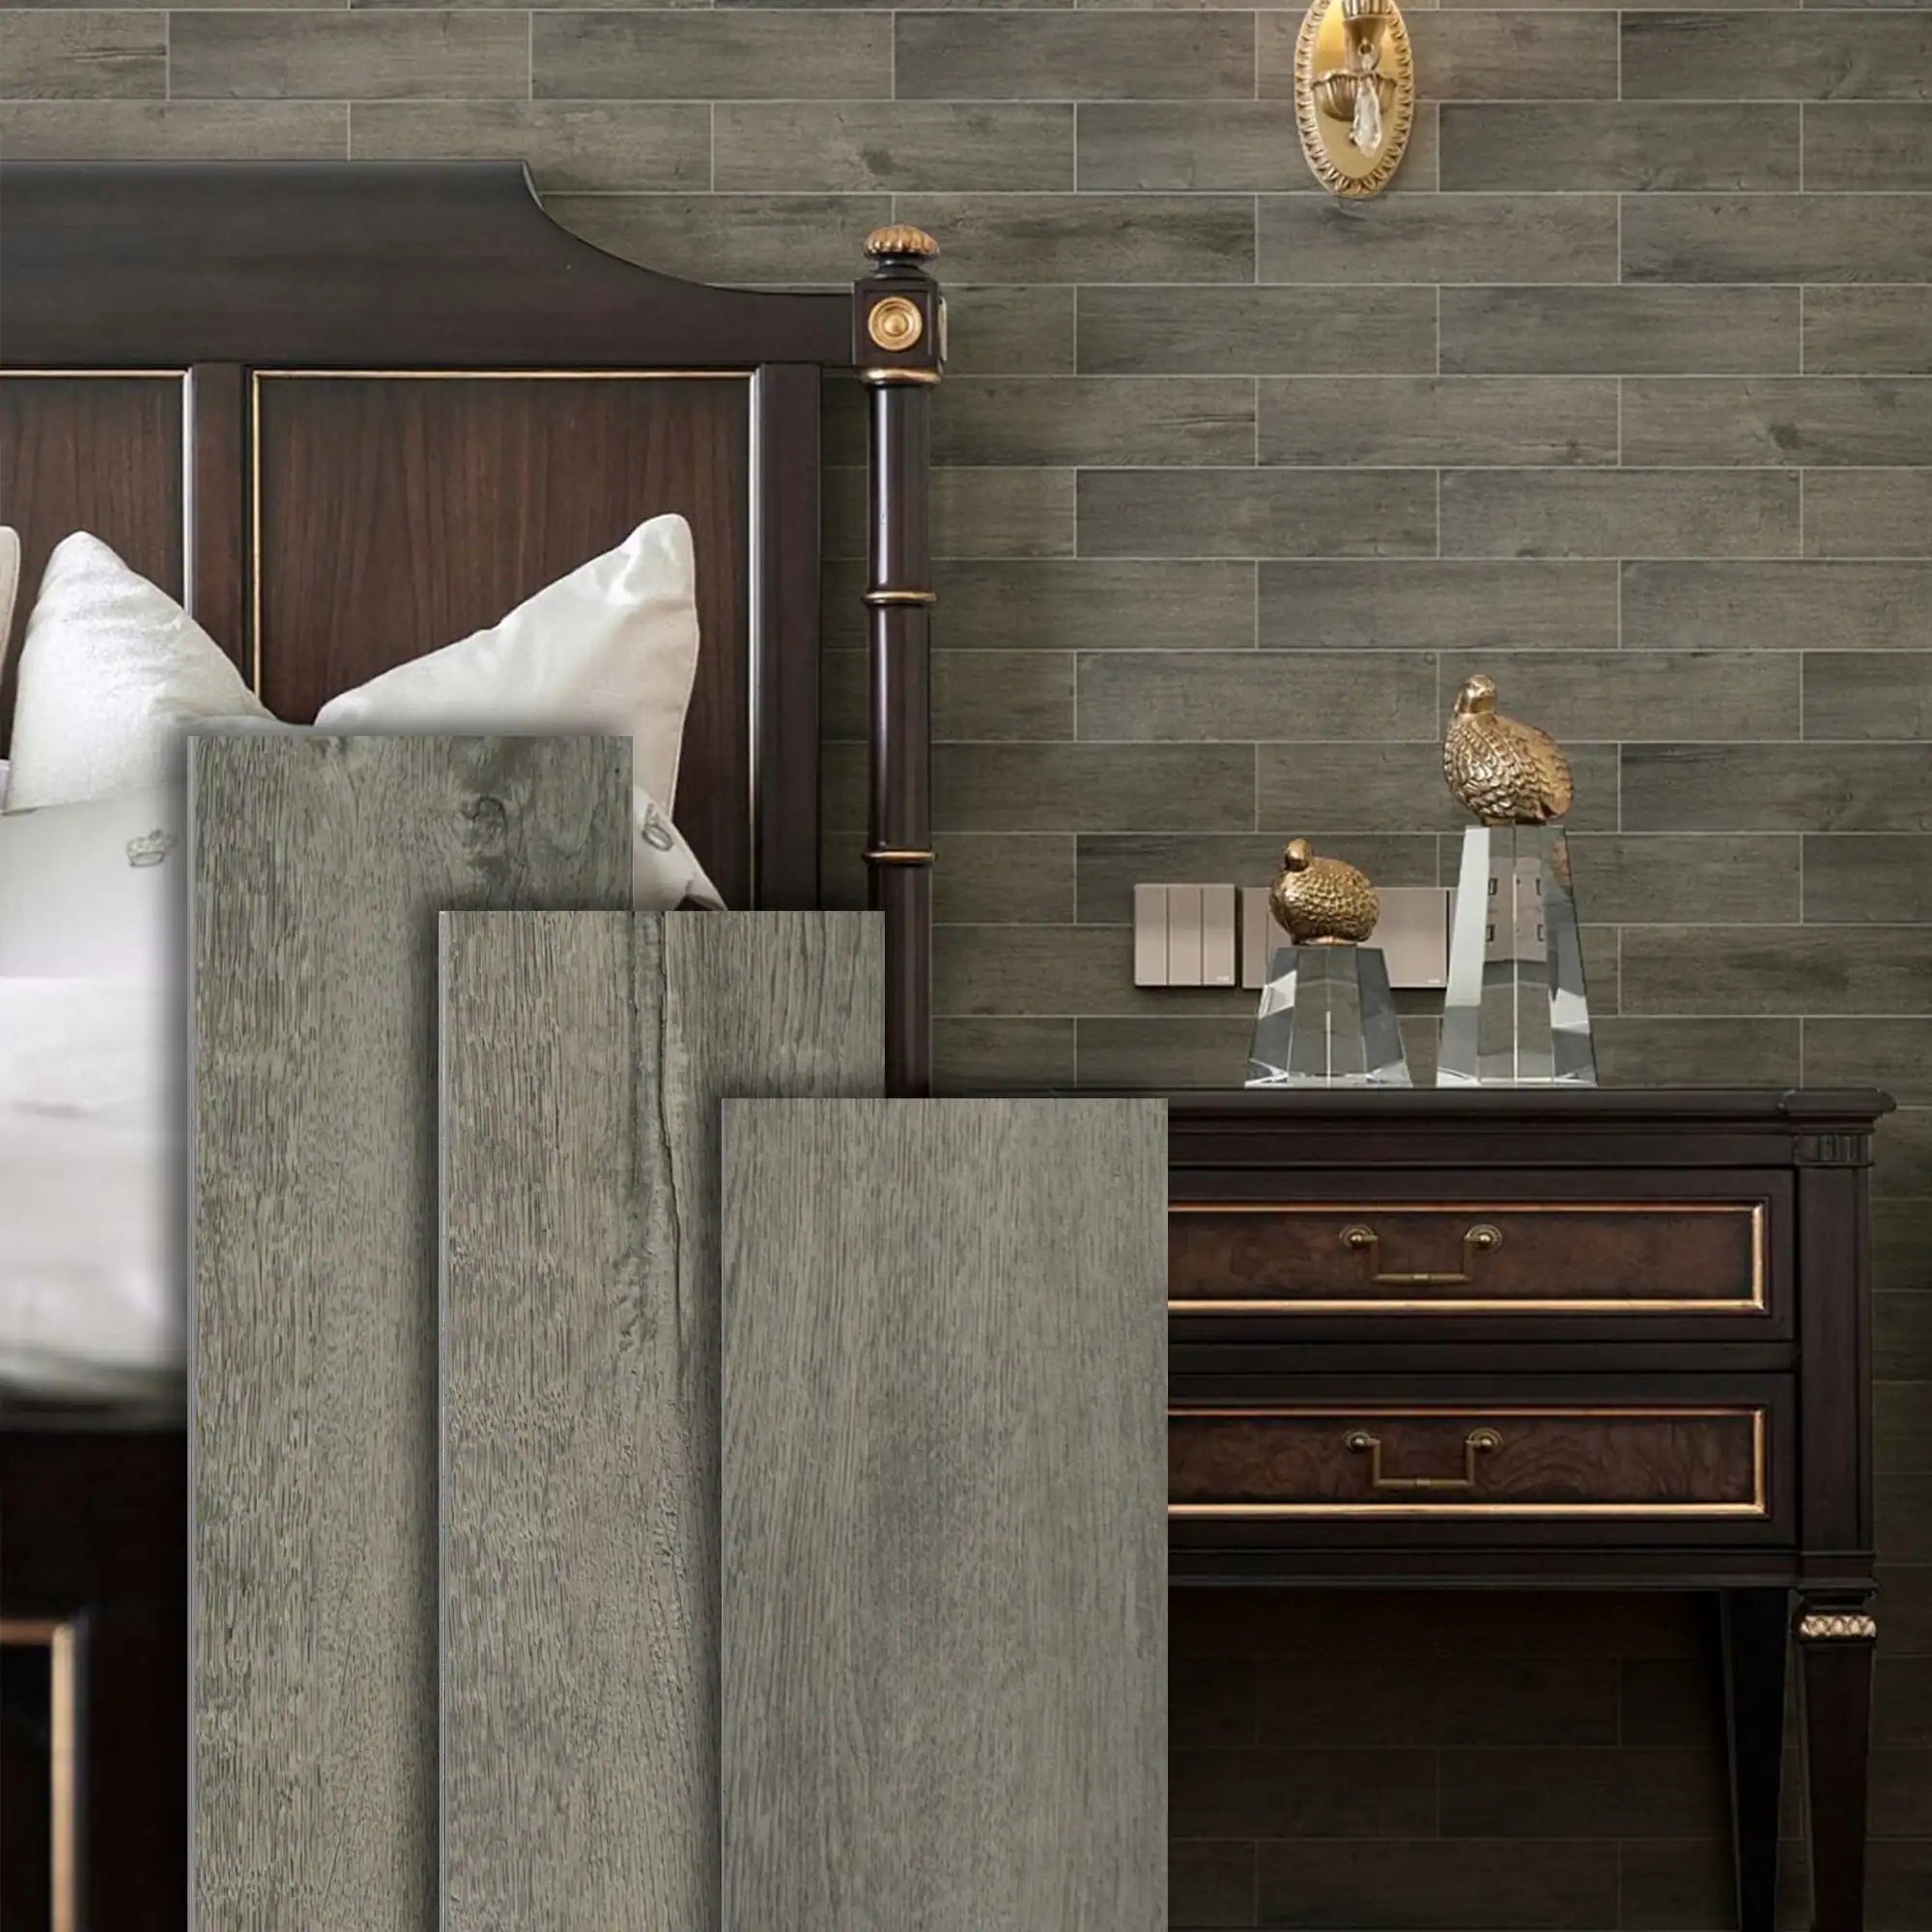 COLAMO Weathered Gray Oak Athens Wood Look Tiles Waterproof Thick Rigid Peel and Stick Backsplashes